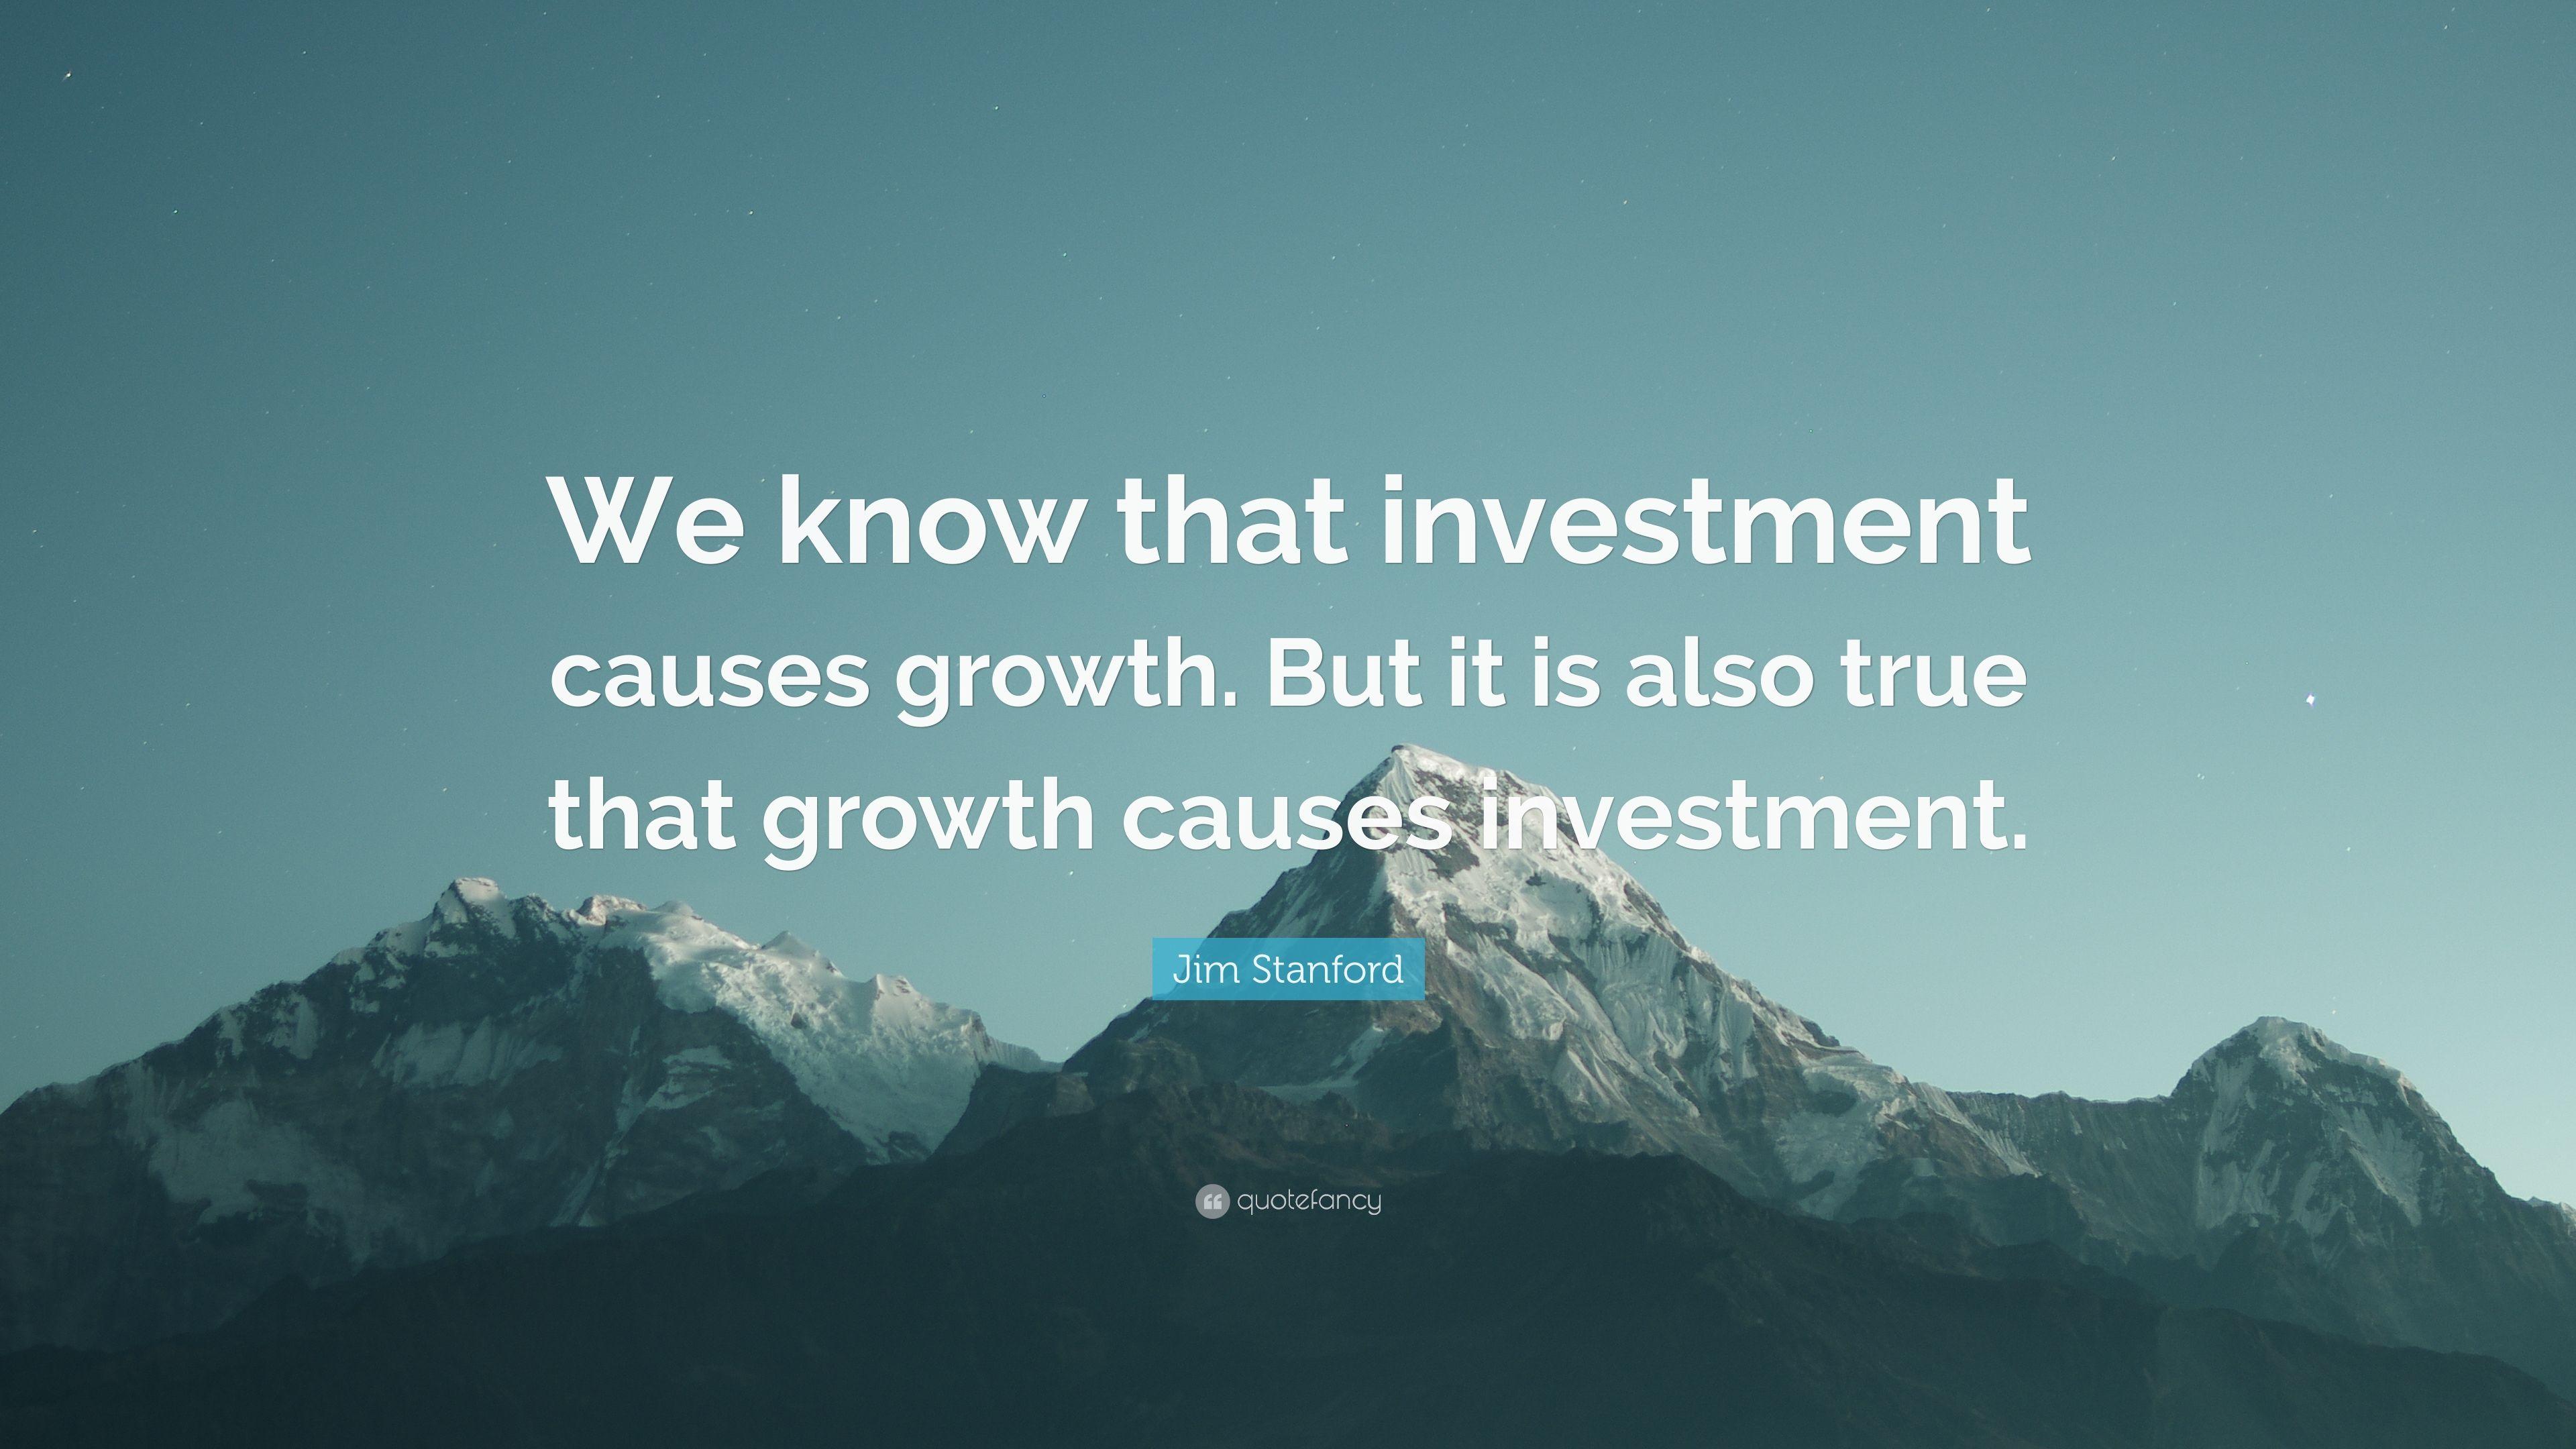 Jim Stanford Quote: “We know that investment causes growth. But it